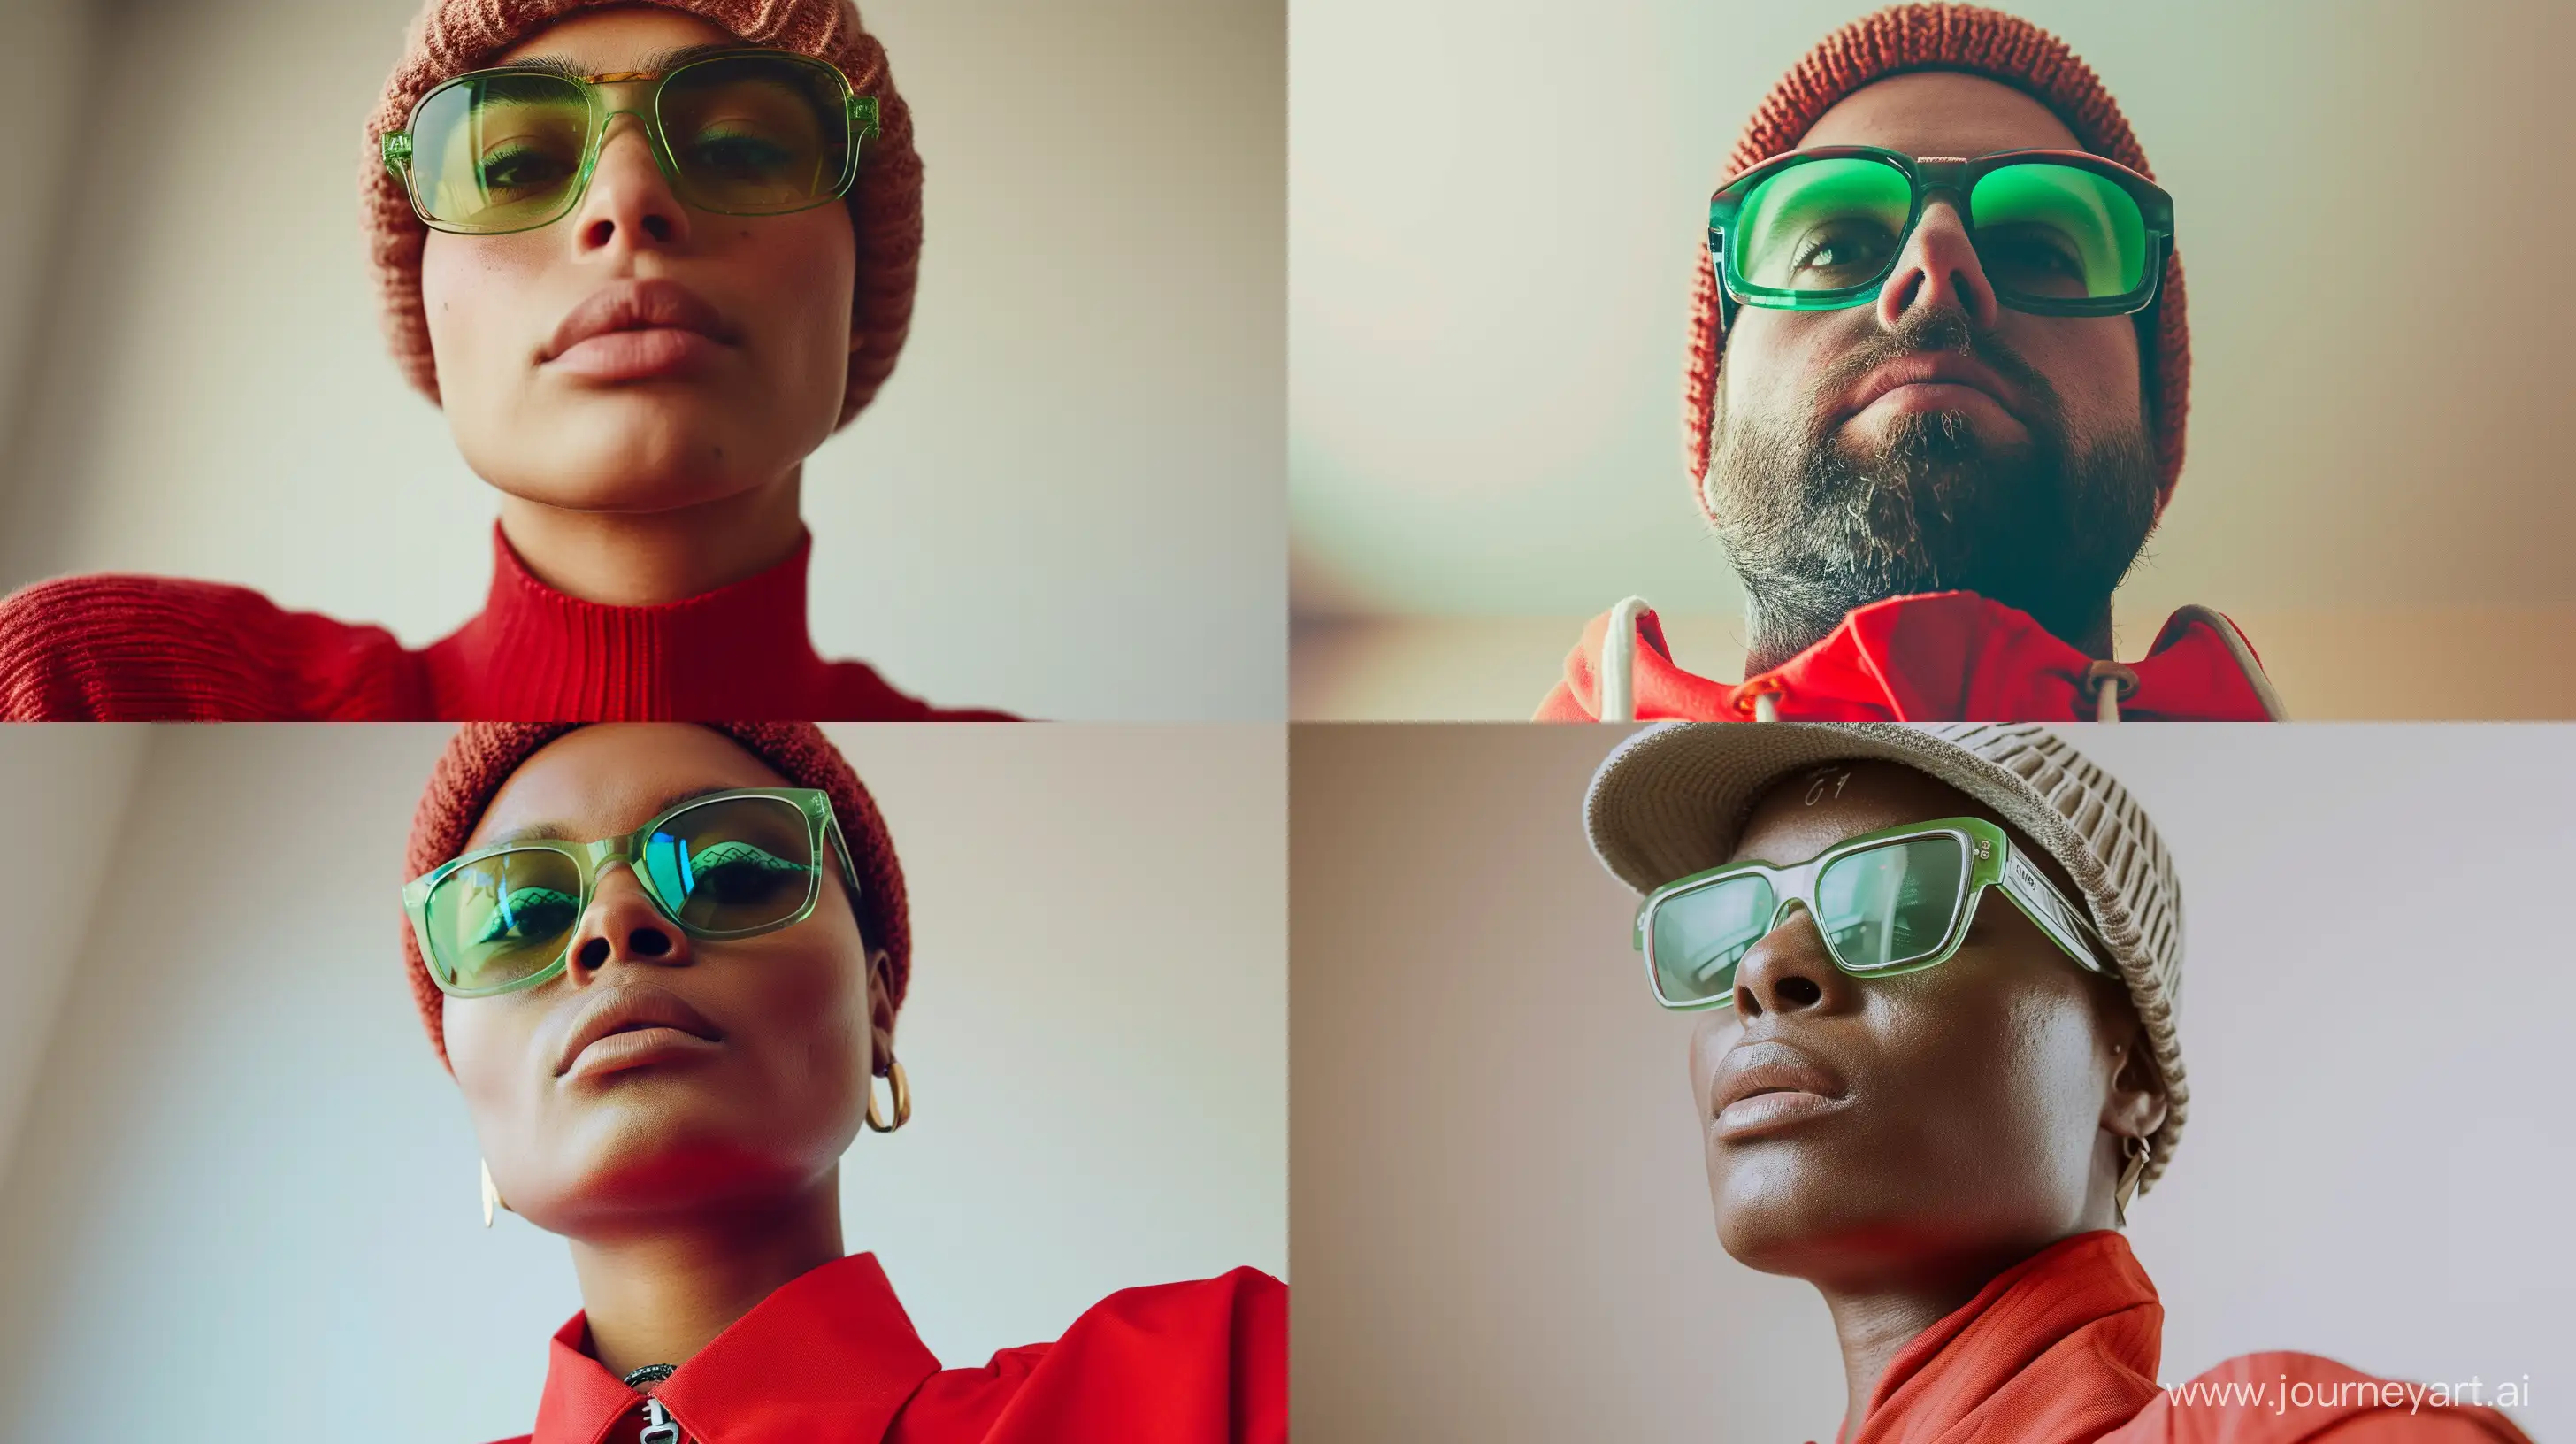 Modern-American-Portrait-in-HighFashion-Red-and-Green-Sunglasses